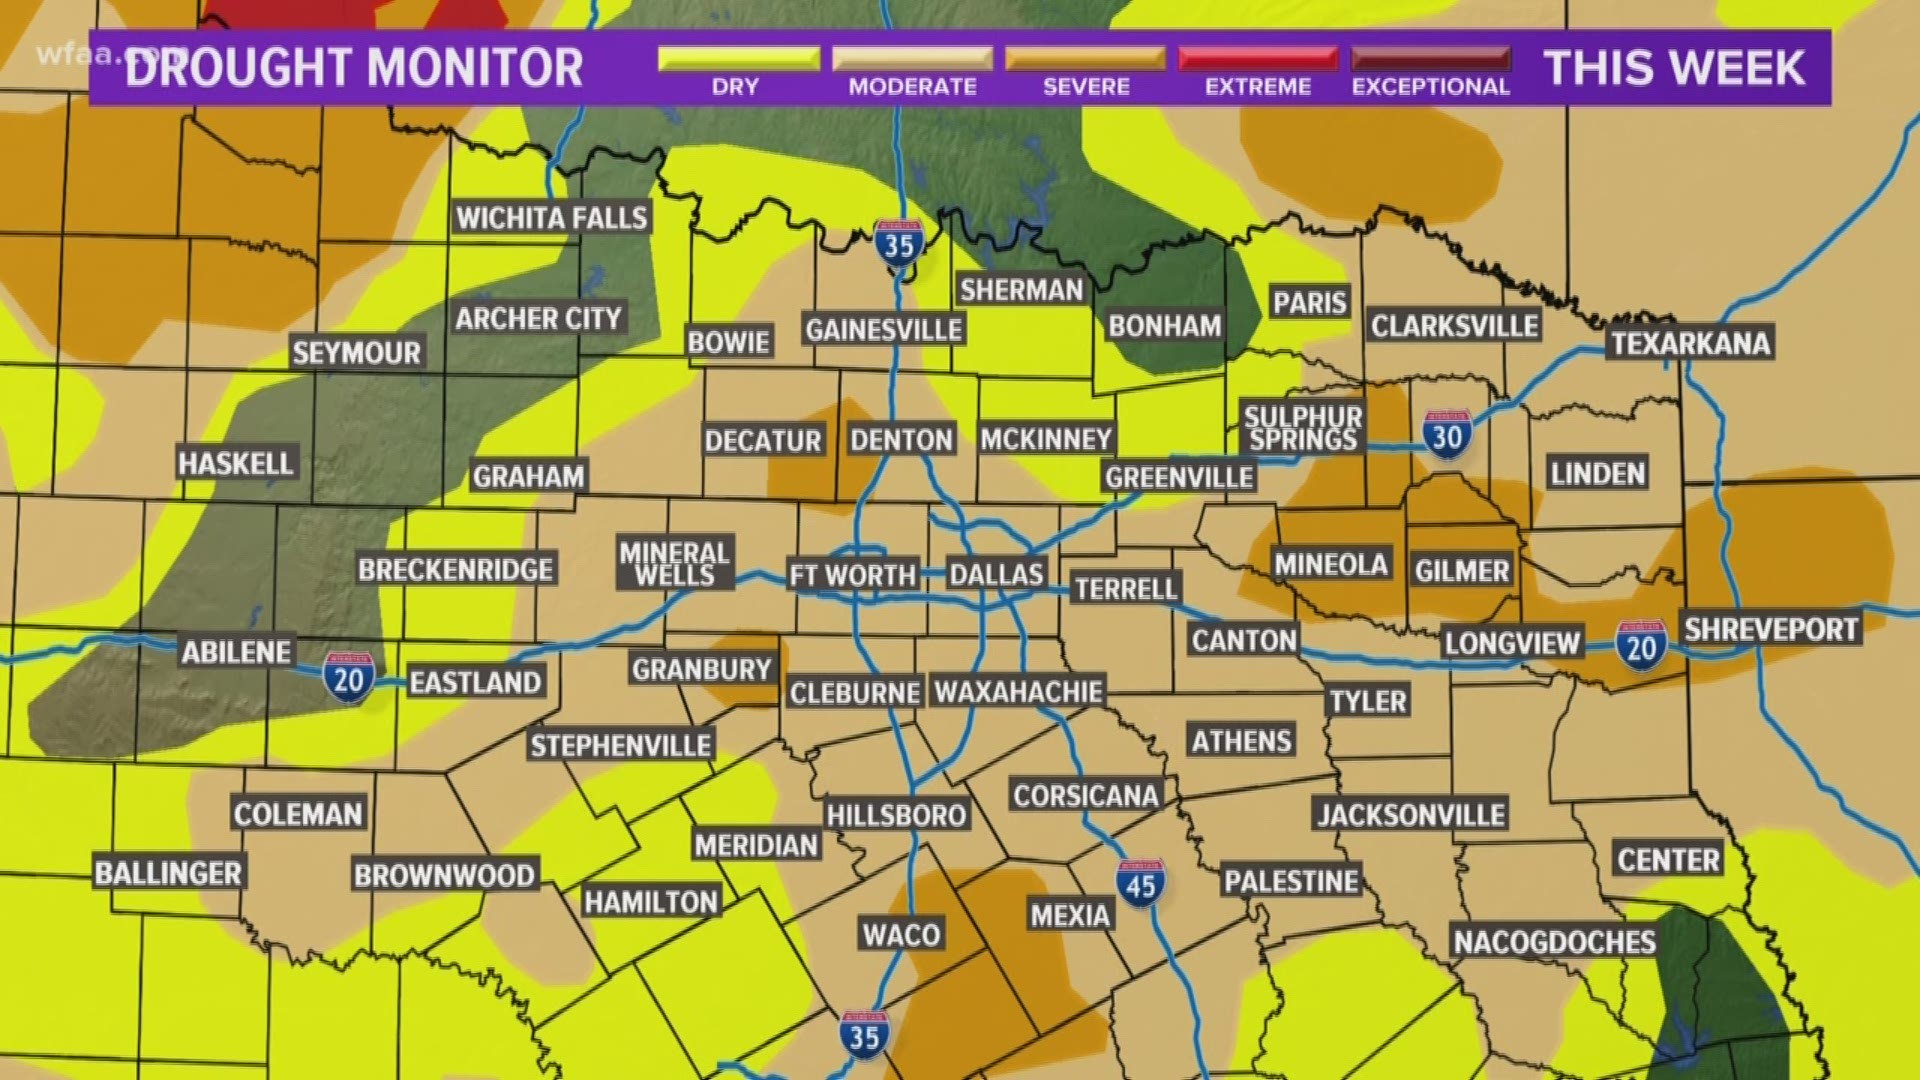 Drought conditions have prompted burn bans across North Texas ahead of Fourth of July.